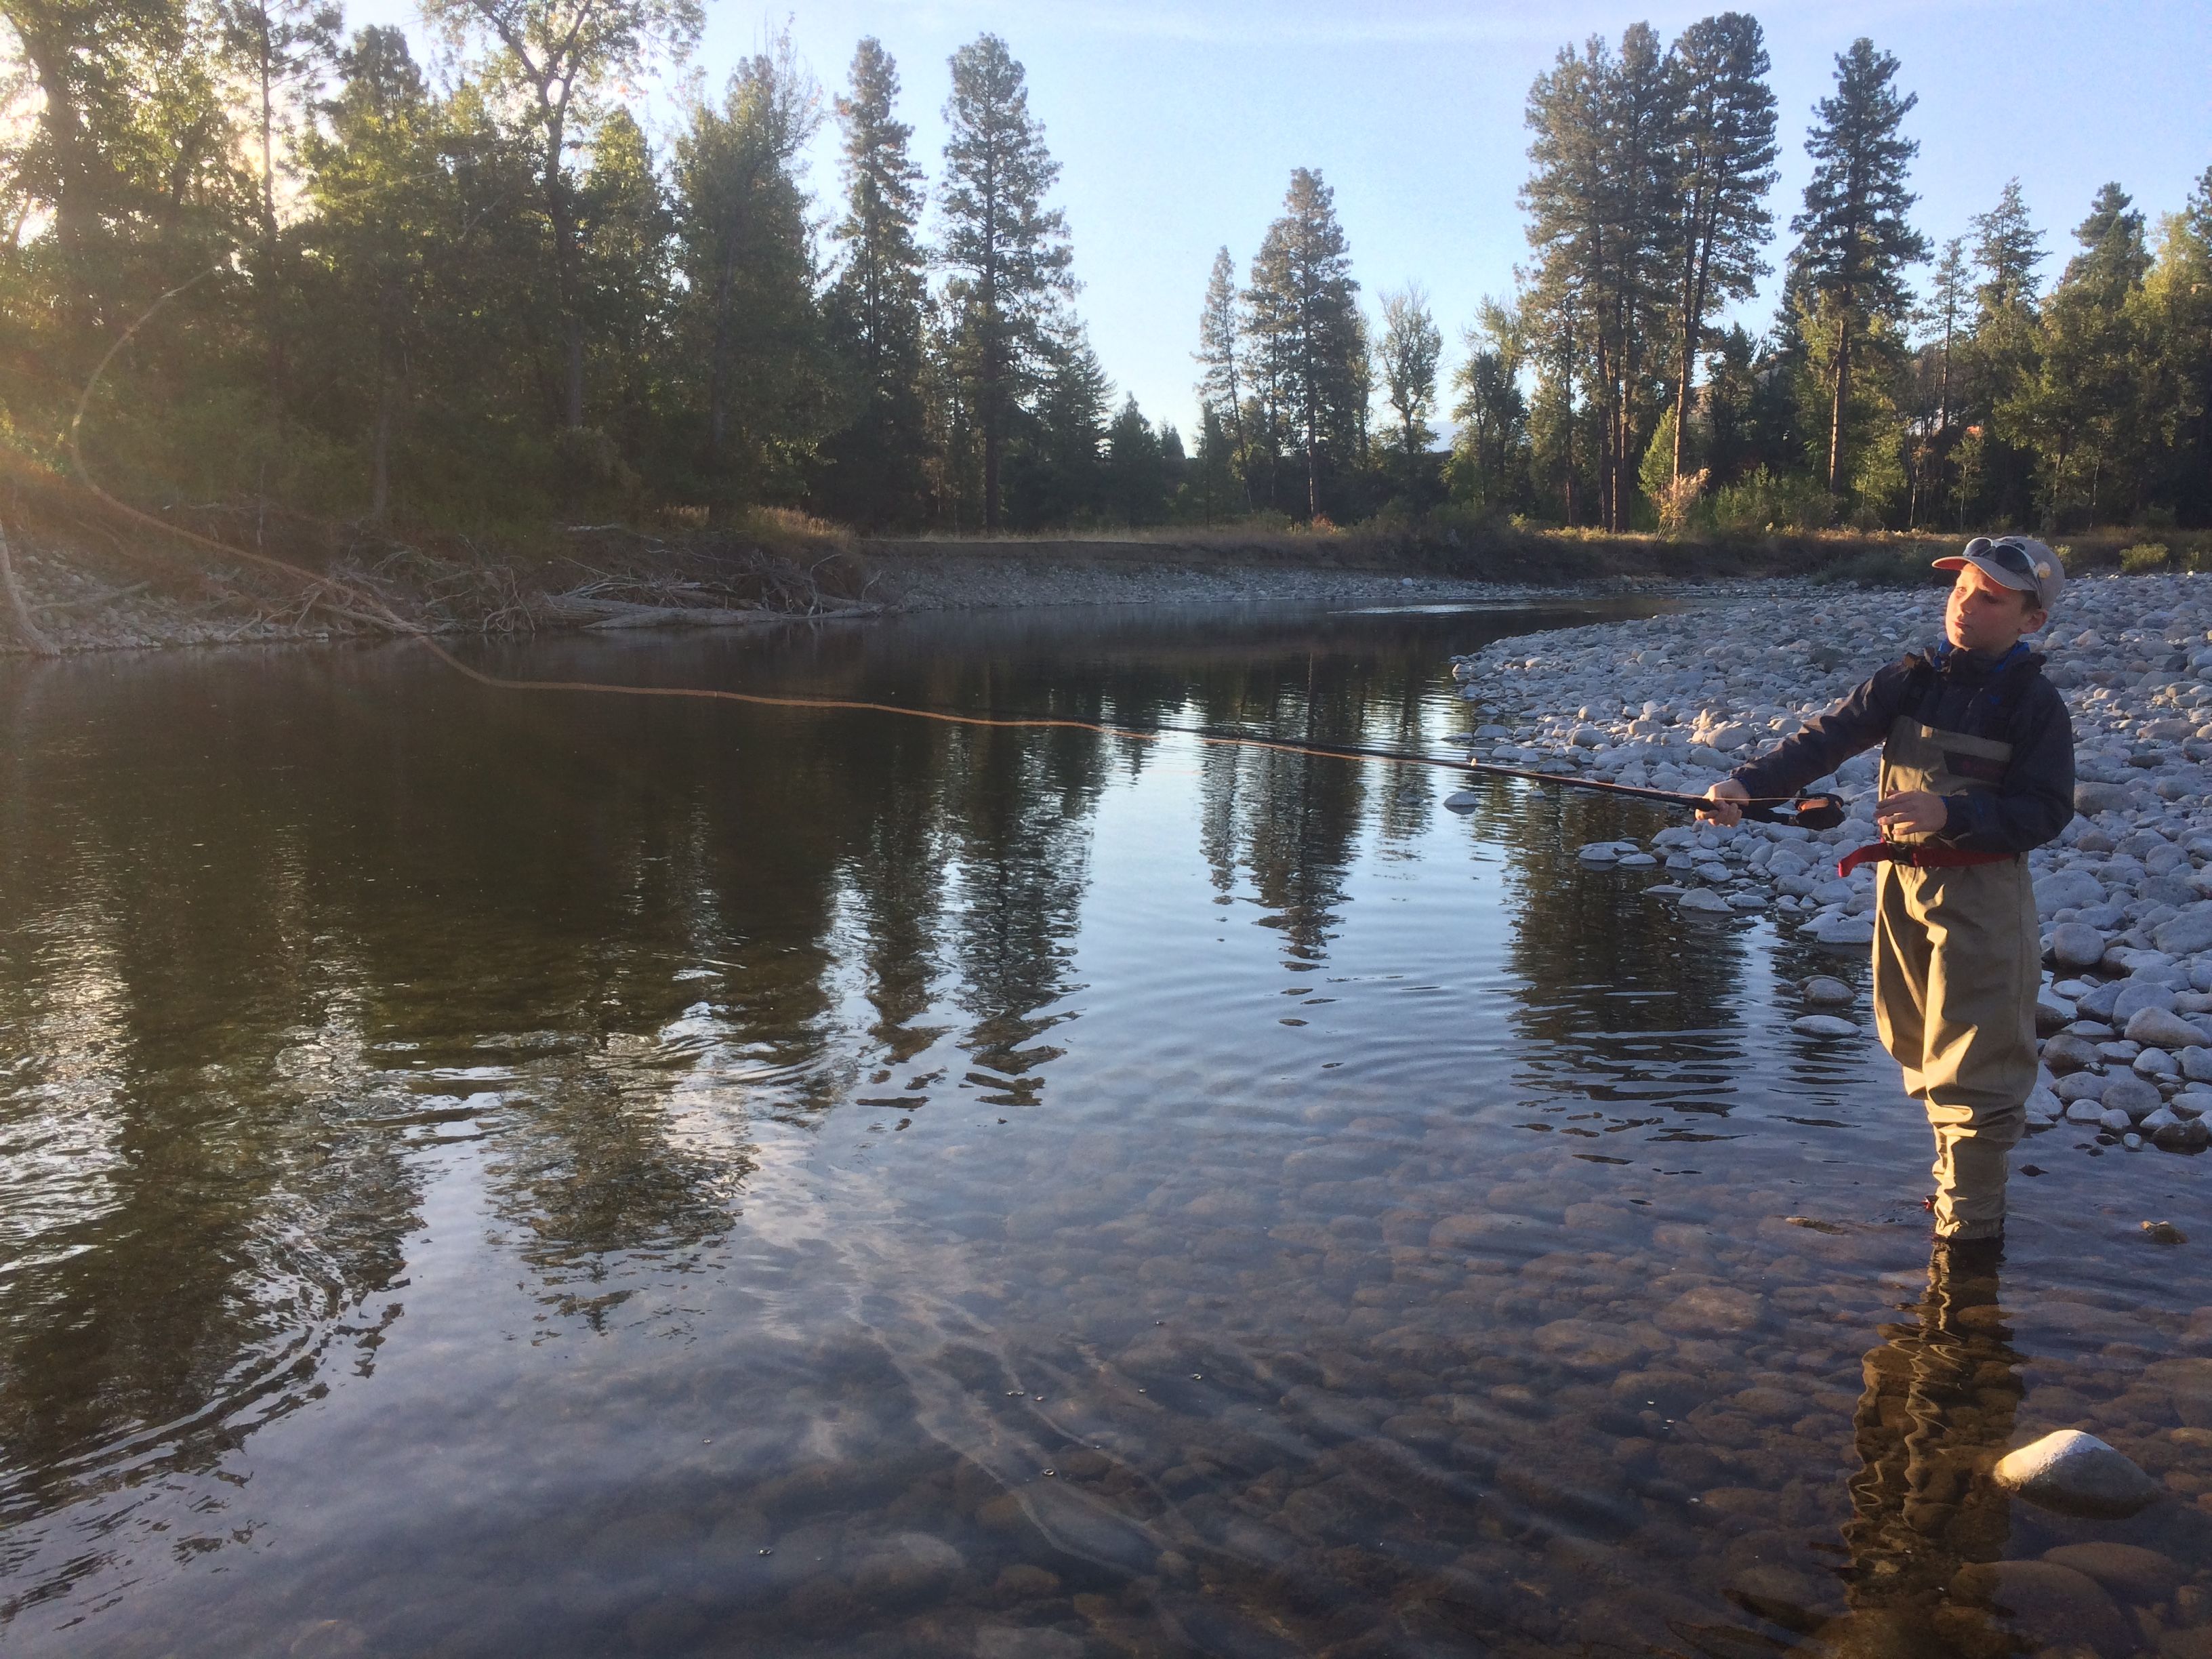 A boy casts a fly fishing rod on the Methow River.